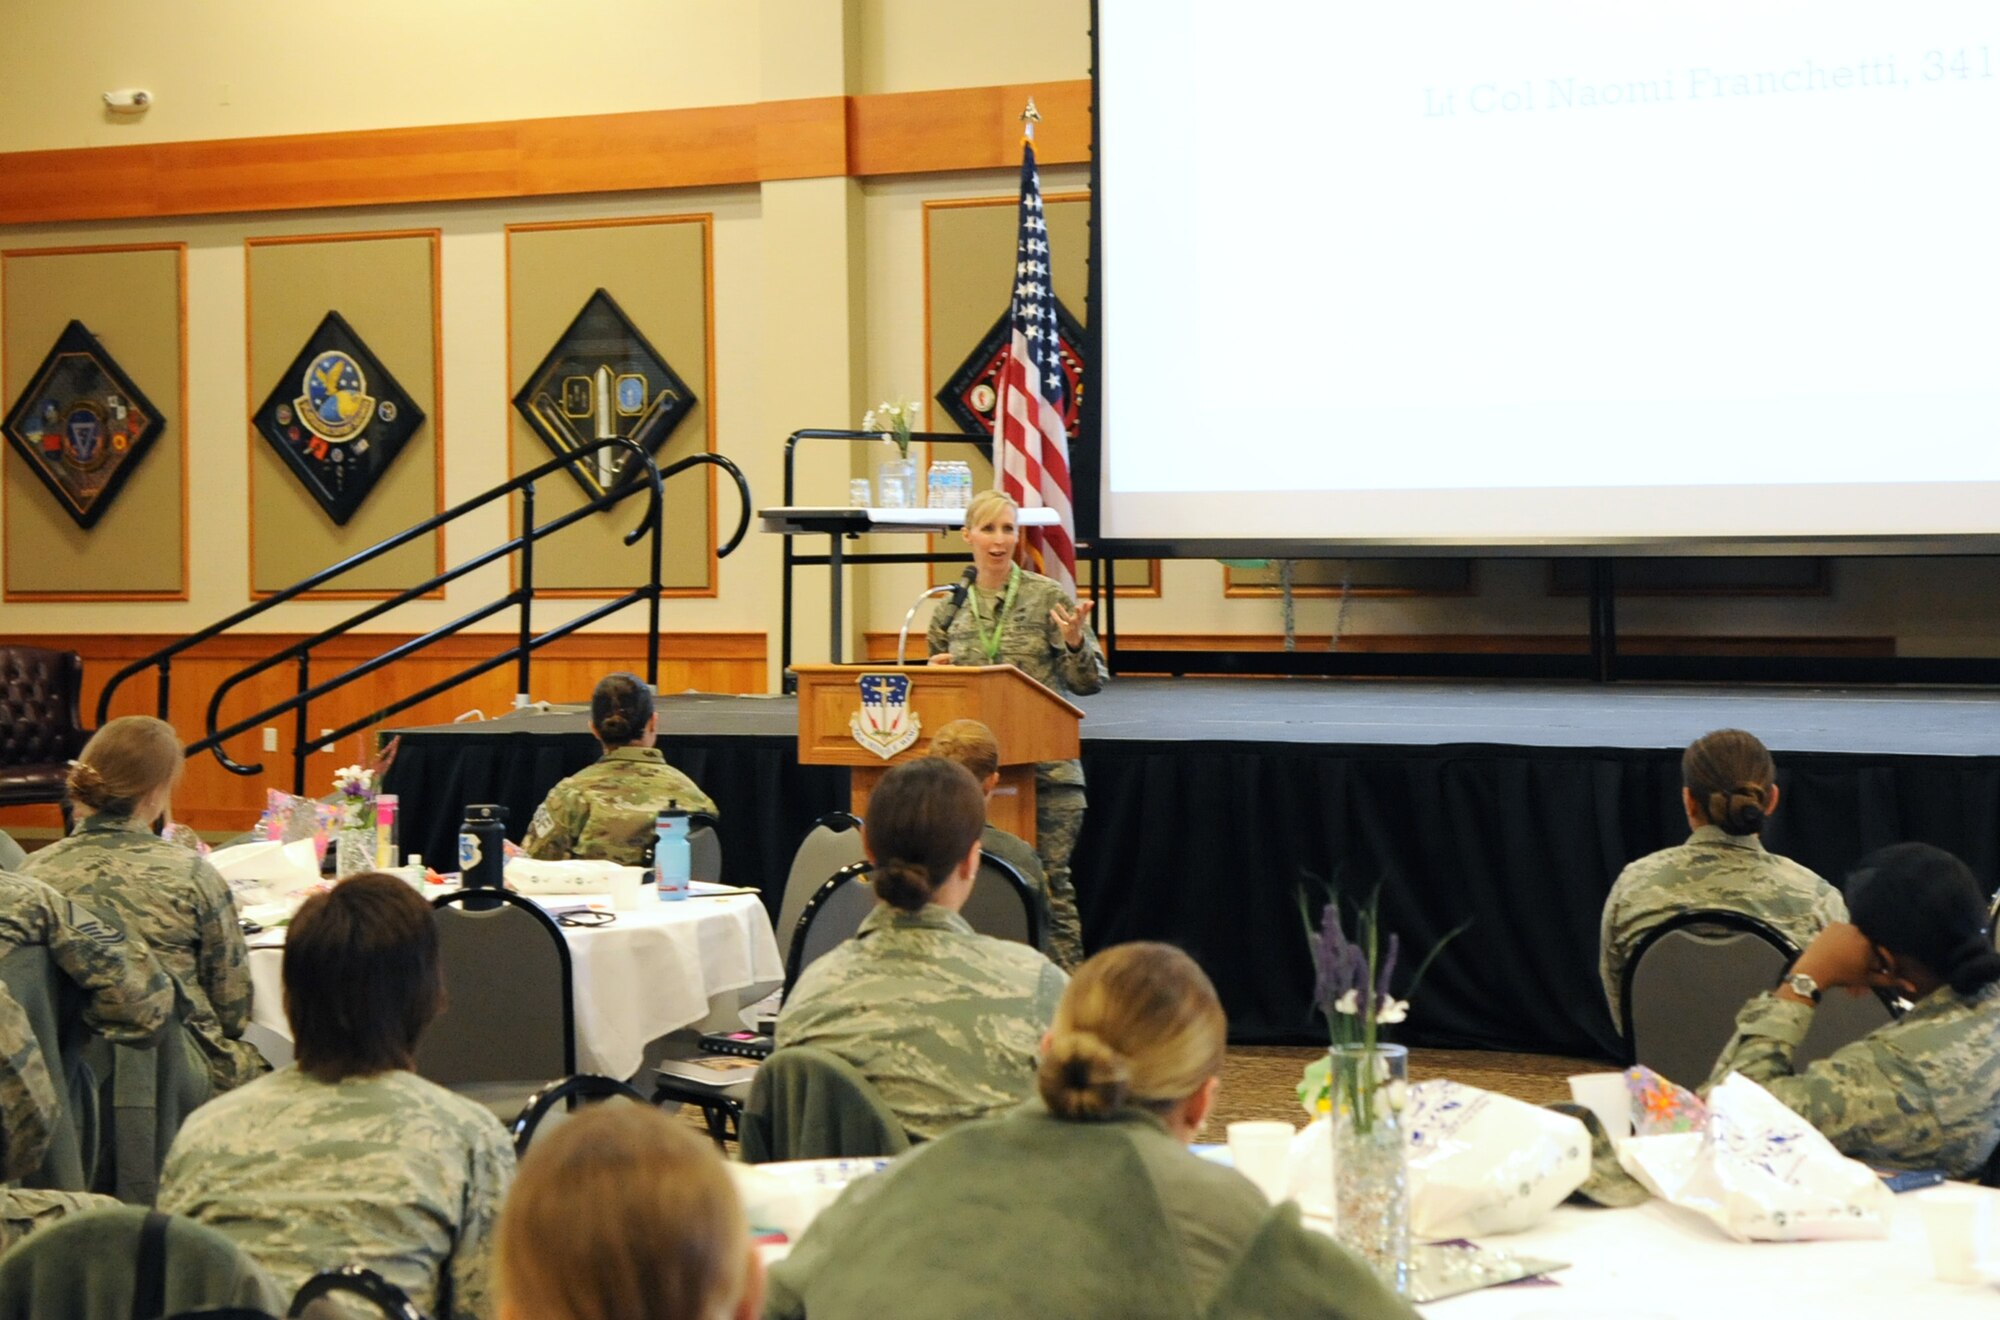 Lt. Col. Naomi Franchetti, 341st Missile Maintenance Squadron commander, talks about adversities she had to overcome while trying to balance military duty with personal life during a women’s symposium March 20, 2018, at Malmstrom Air Force Base, Mont. The two-day event was geared toward educating, enhancing communication and building leadership and unity across the military and local community. (U.S. Air Force photo by Christy Mason)